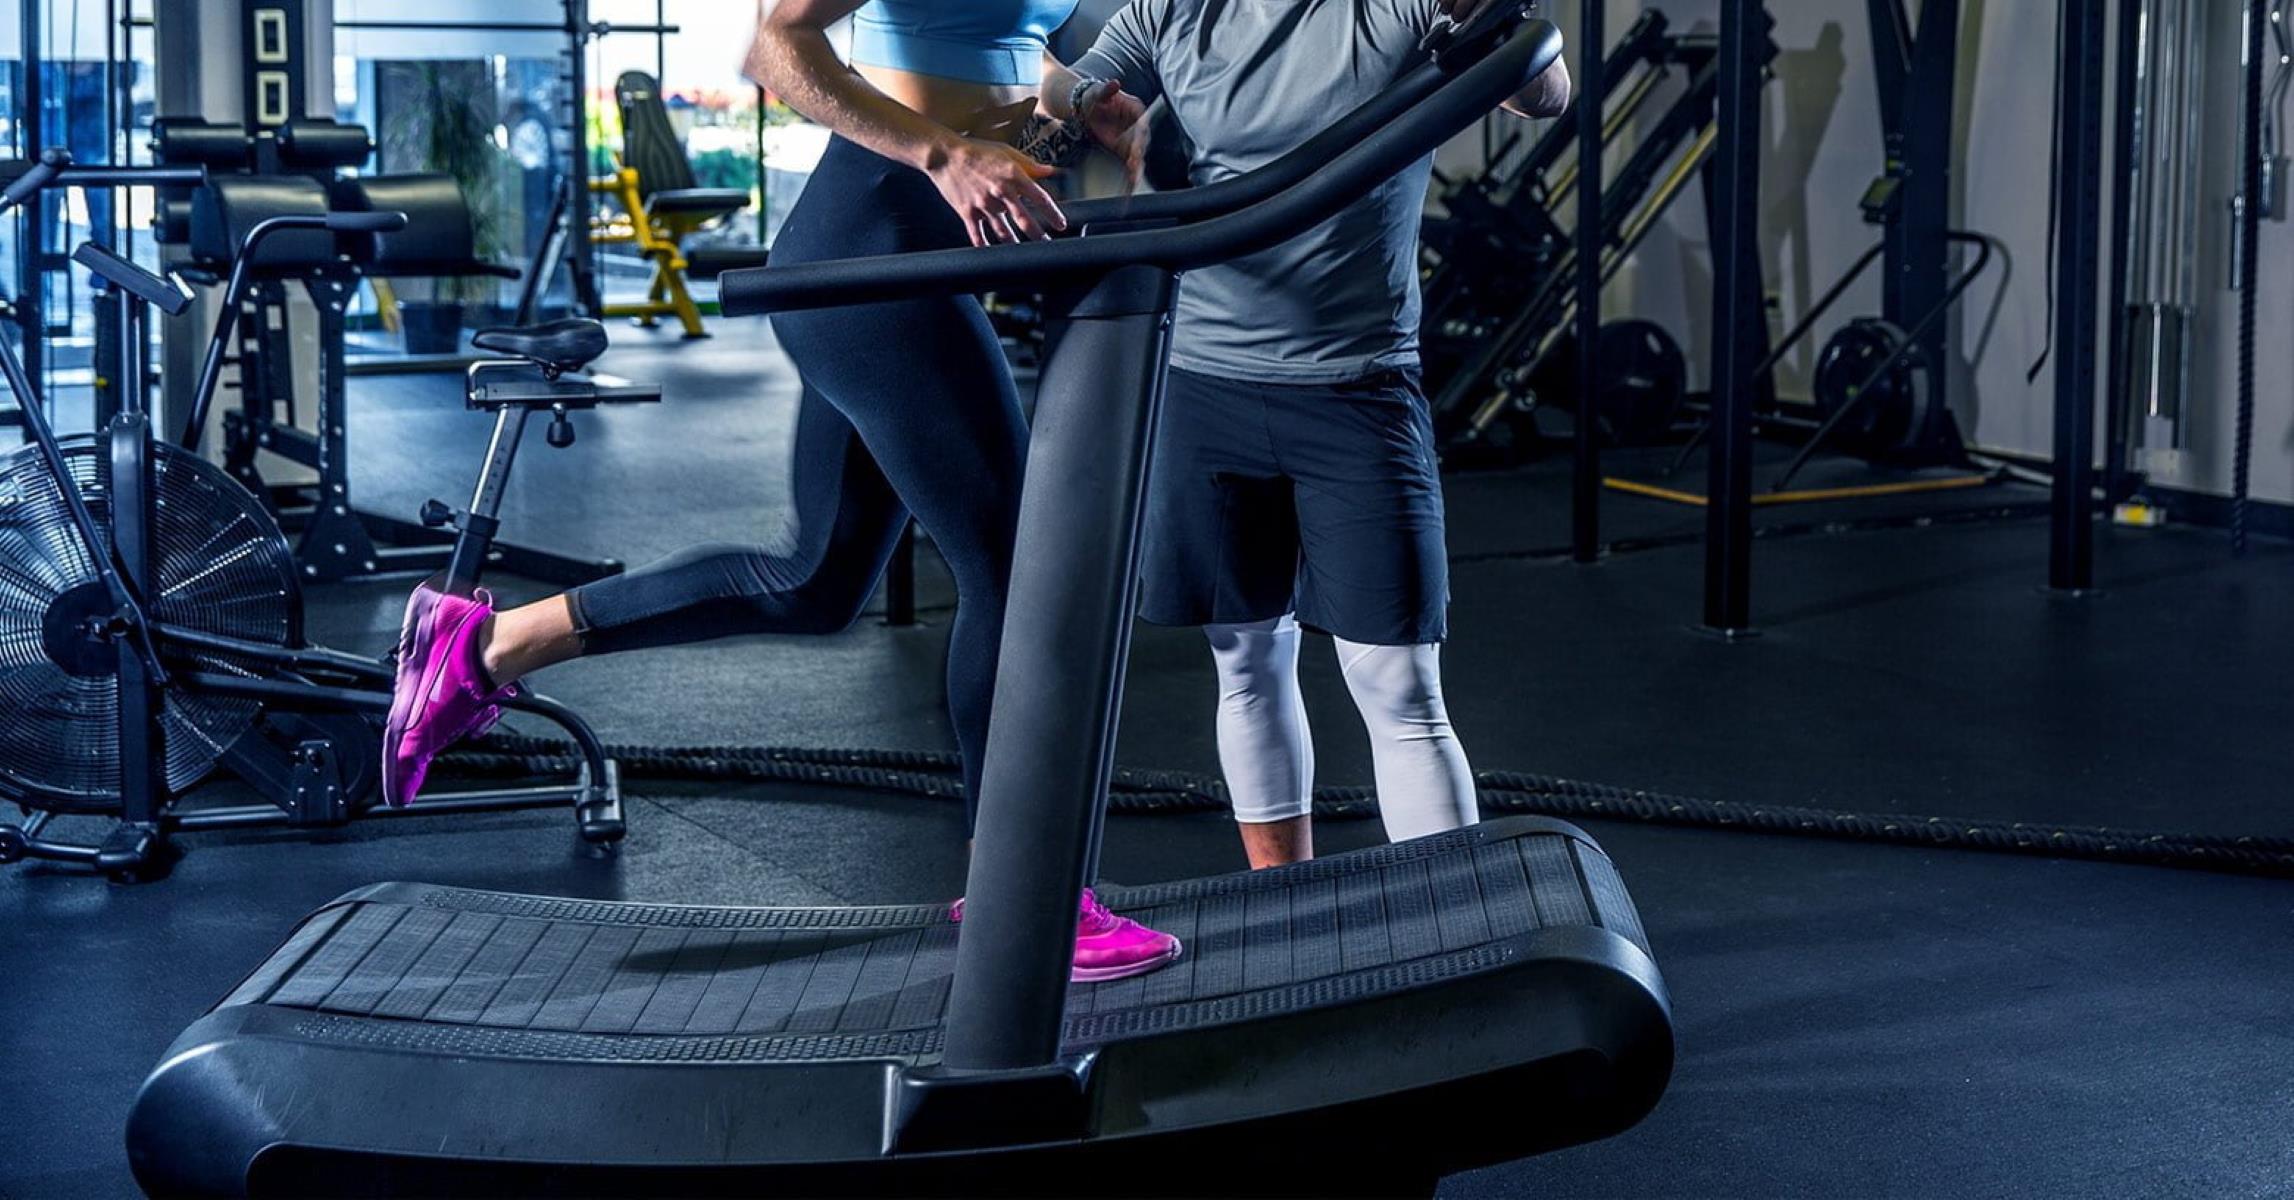 How To Use Curved Treadmill